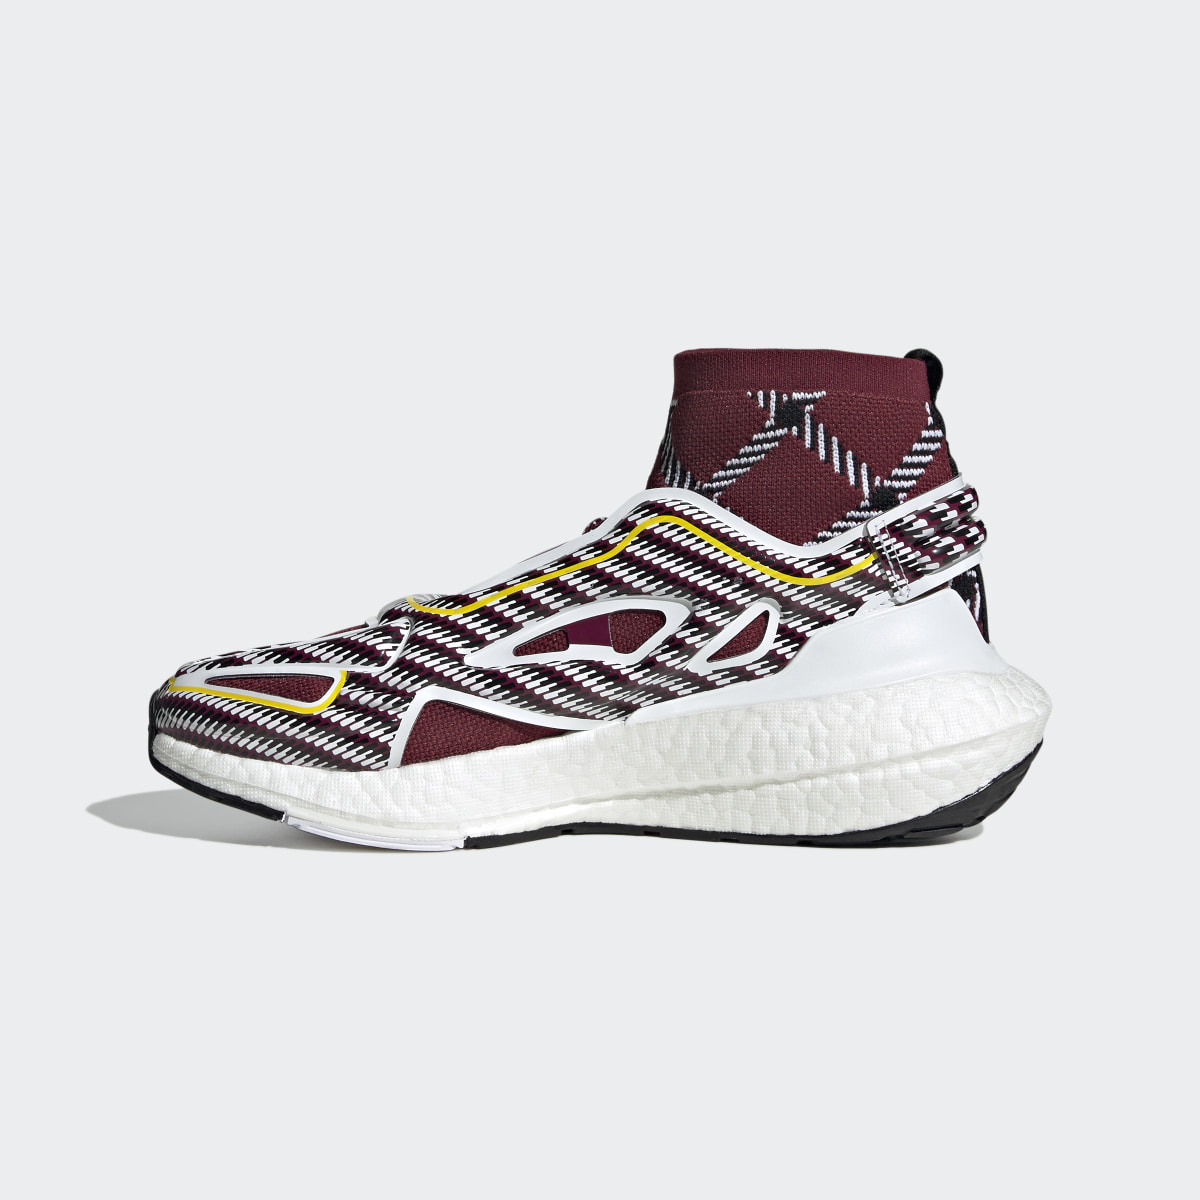 Adidas by Stella McCartney Ultraboost 22 Elevated Shoes. 7